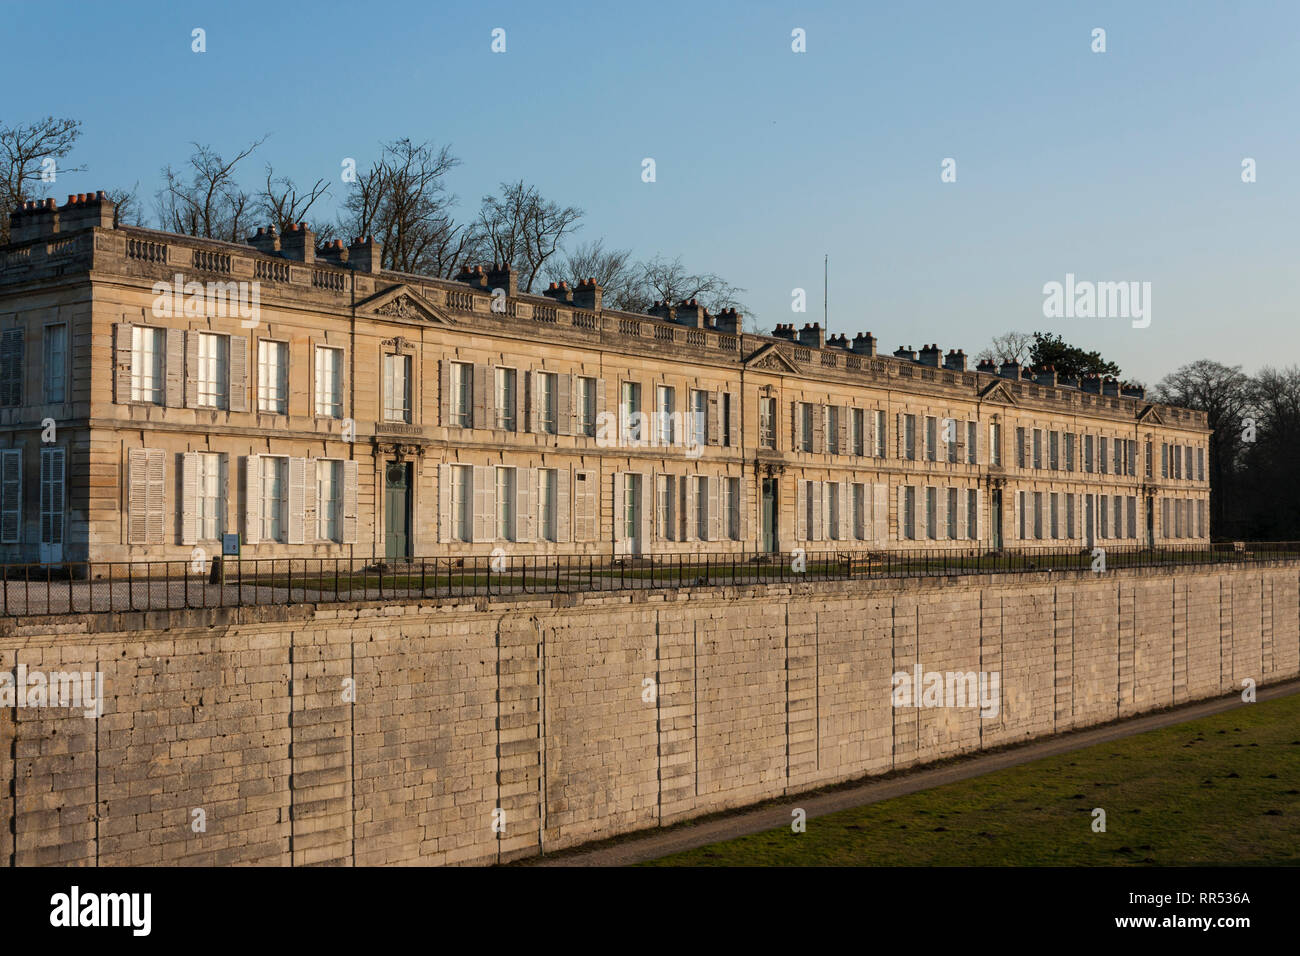 The Château d'Enghien (built 1769) within the grounds of Château de Chantilly, Oise, France Stock Photo